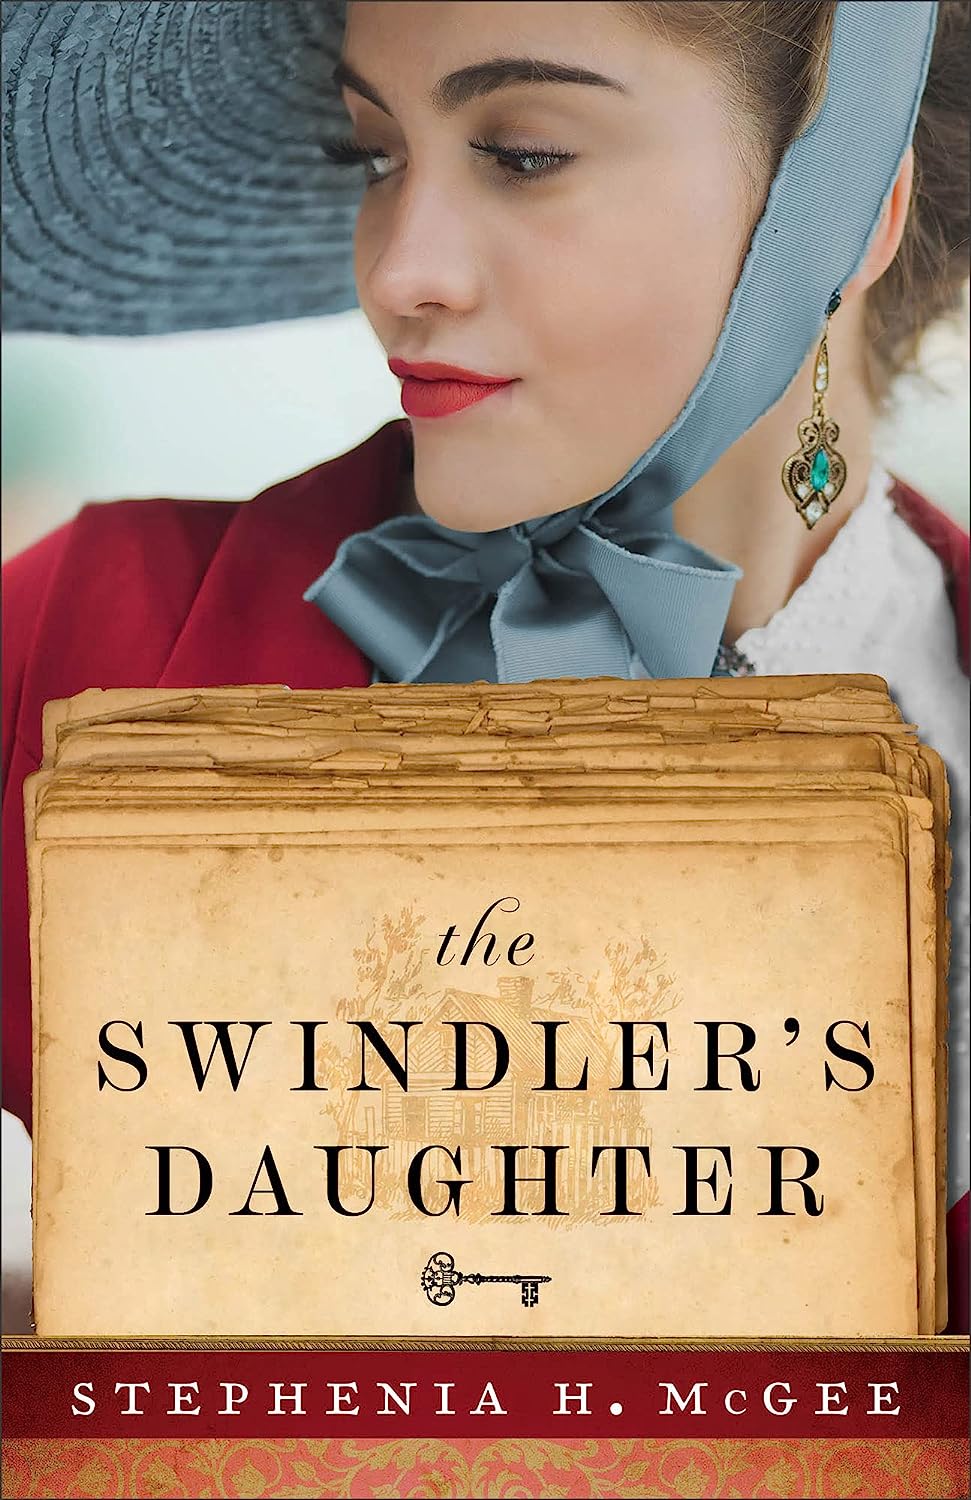 Image for "The Swindler's Daughter"